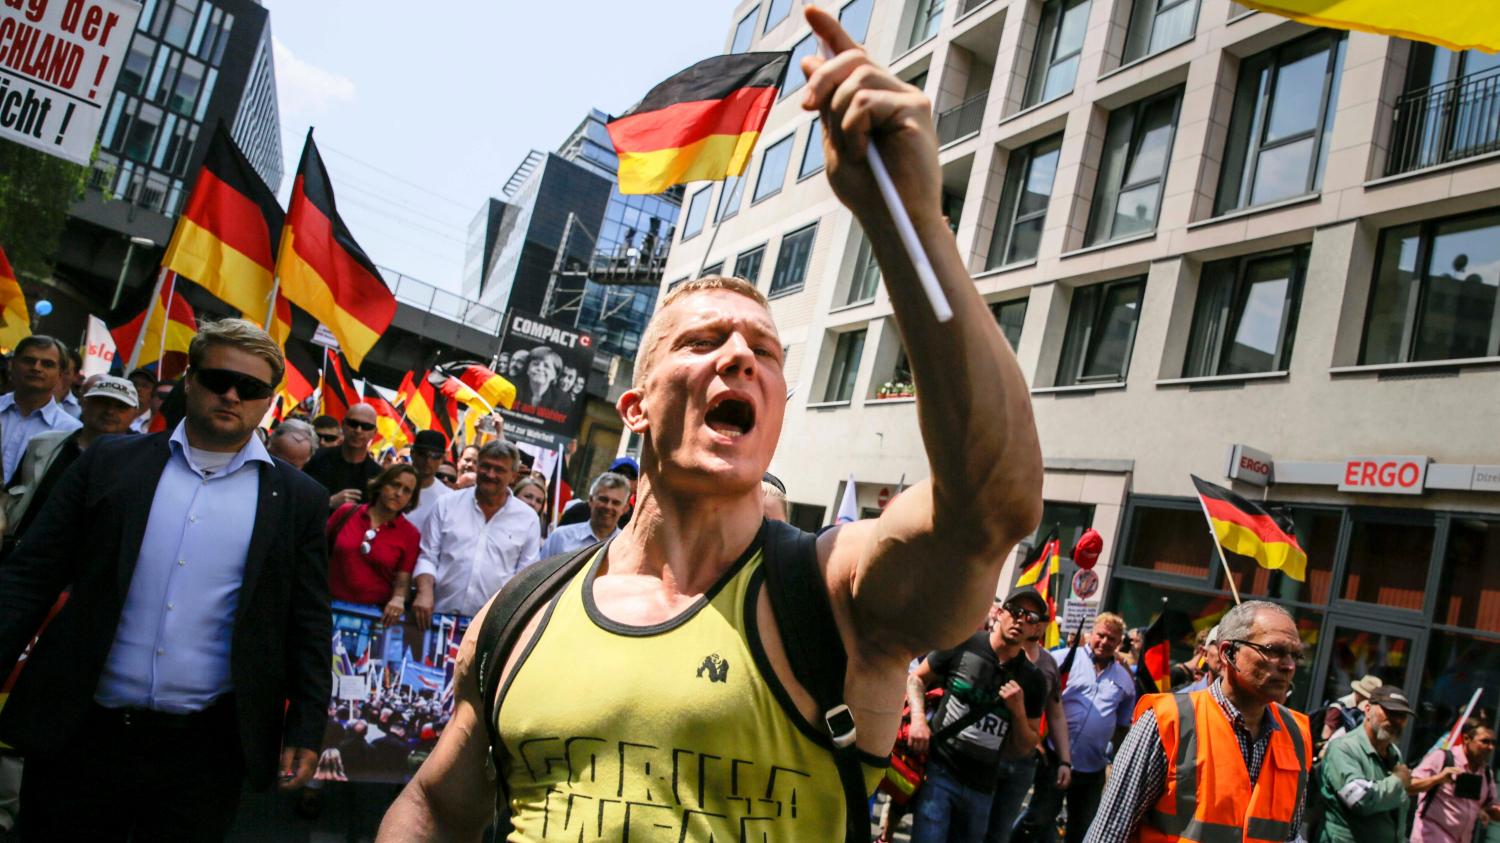 The German far-right is getting stronger